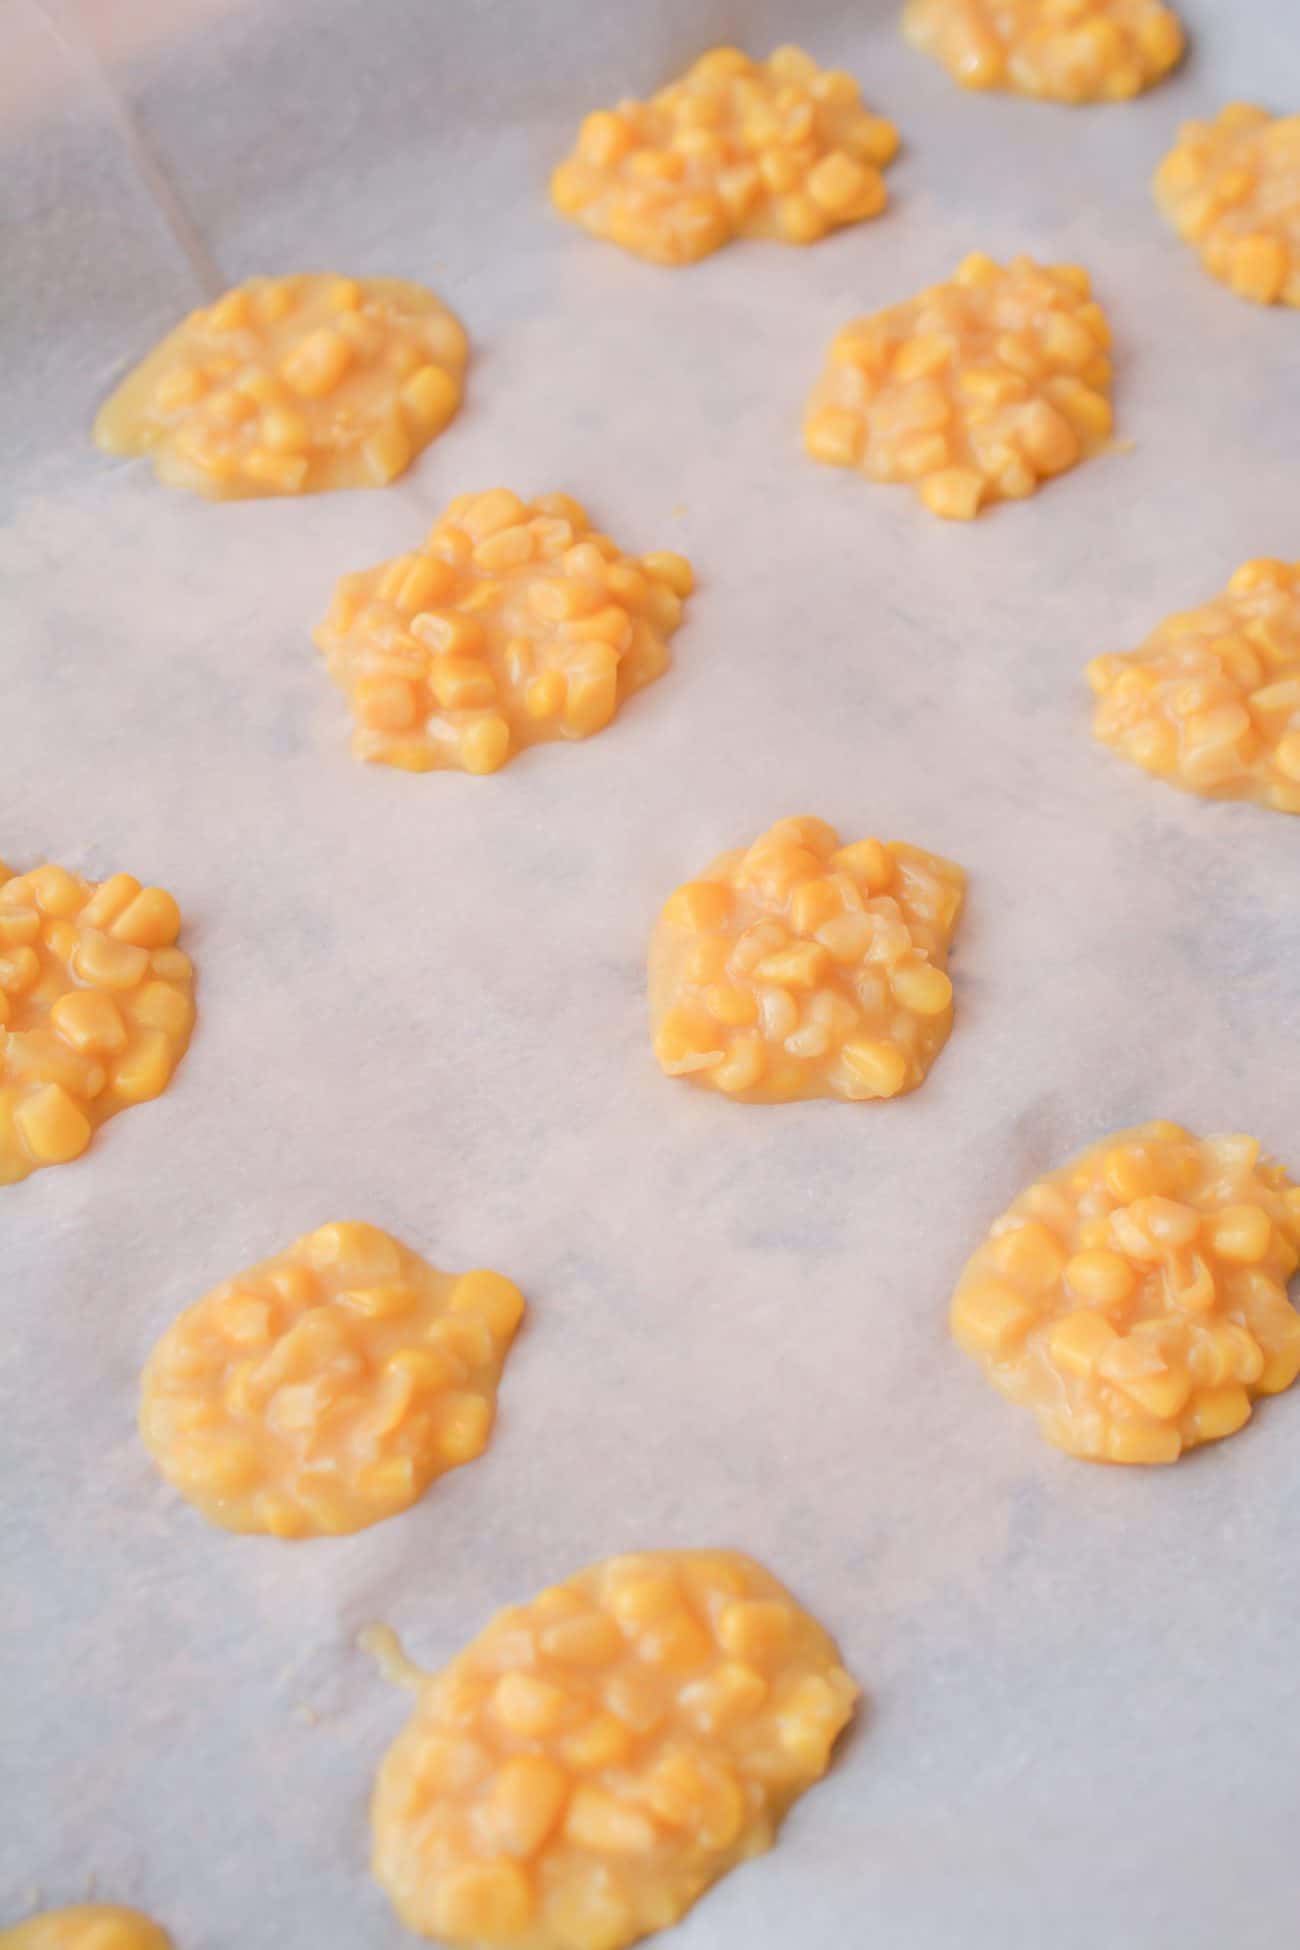 Place spoonfuls of the corn mixture onto a large parchment-lined baking sheet and freeze for 3-4 hours.